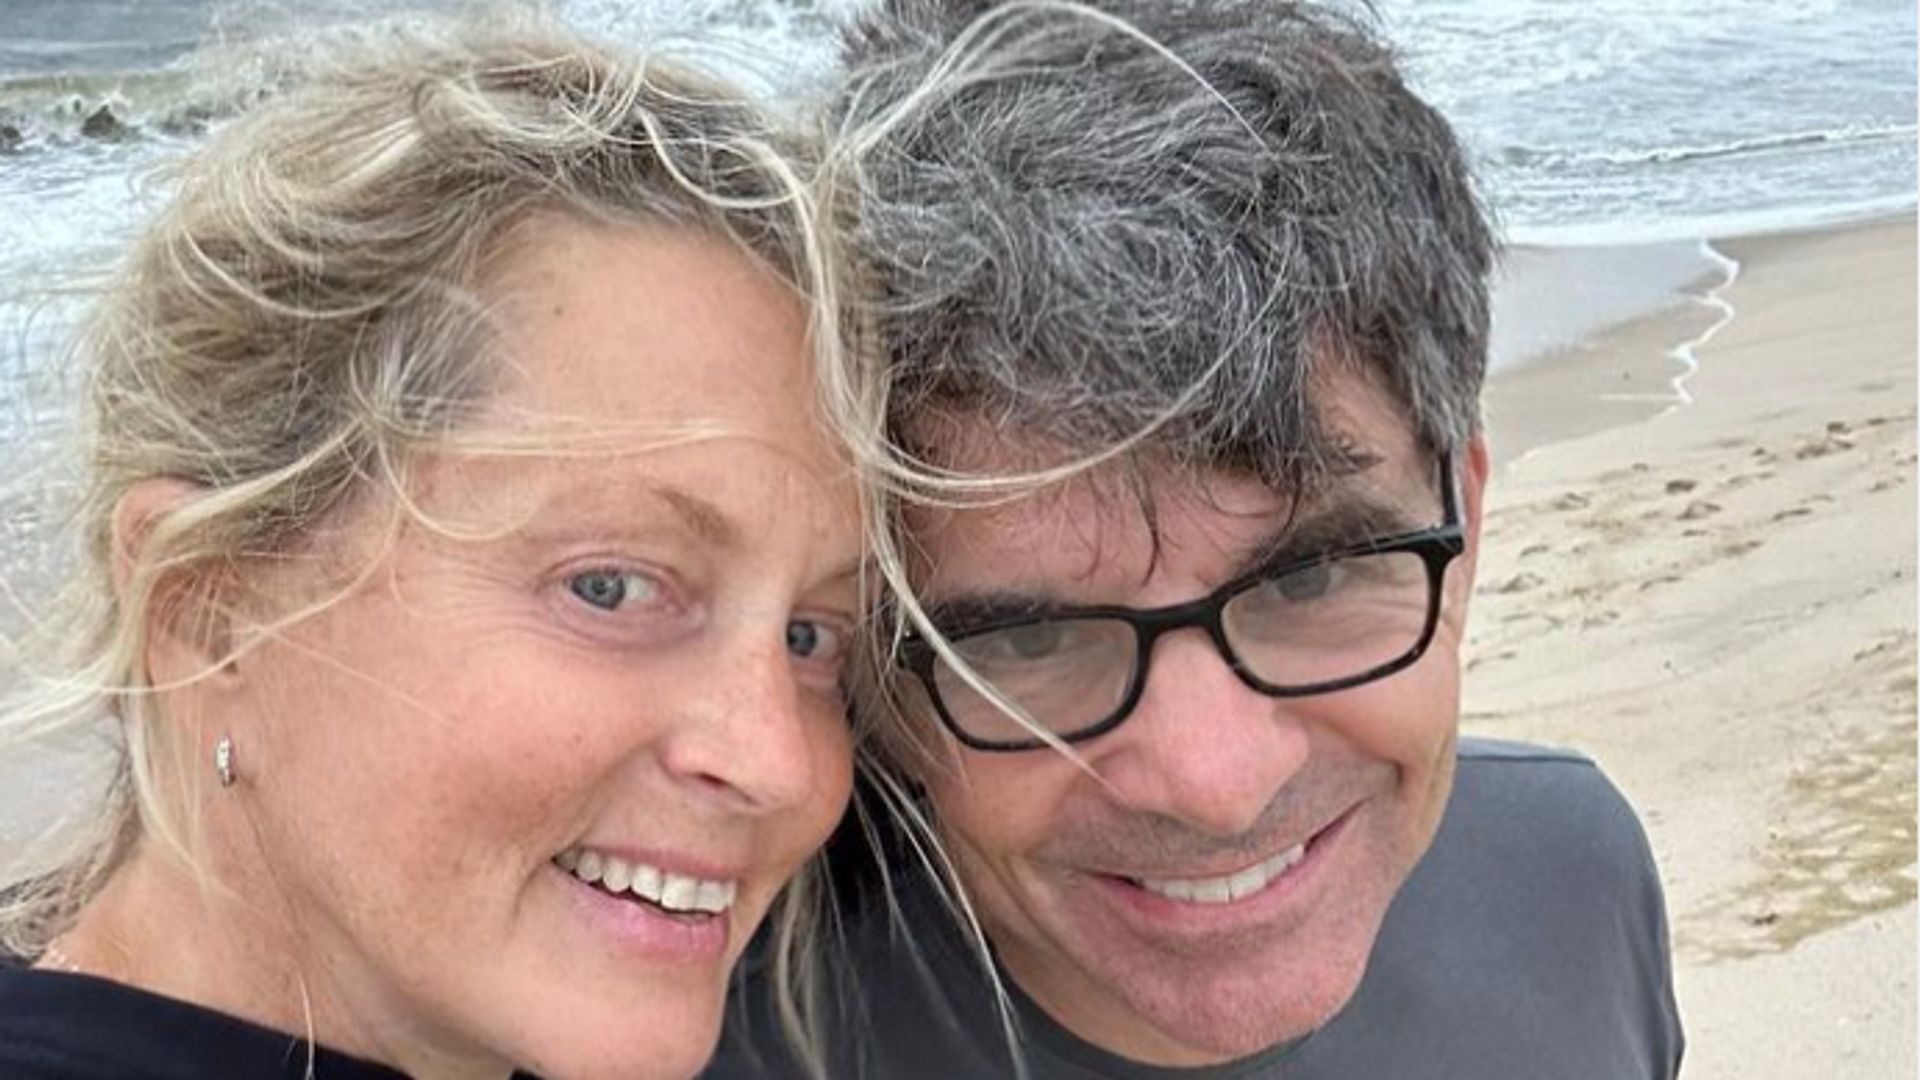 Ali Wentworth and George Stephanopoulos on the beach